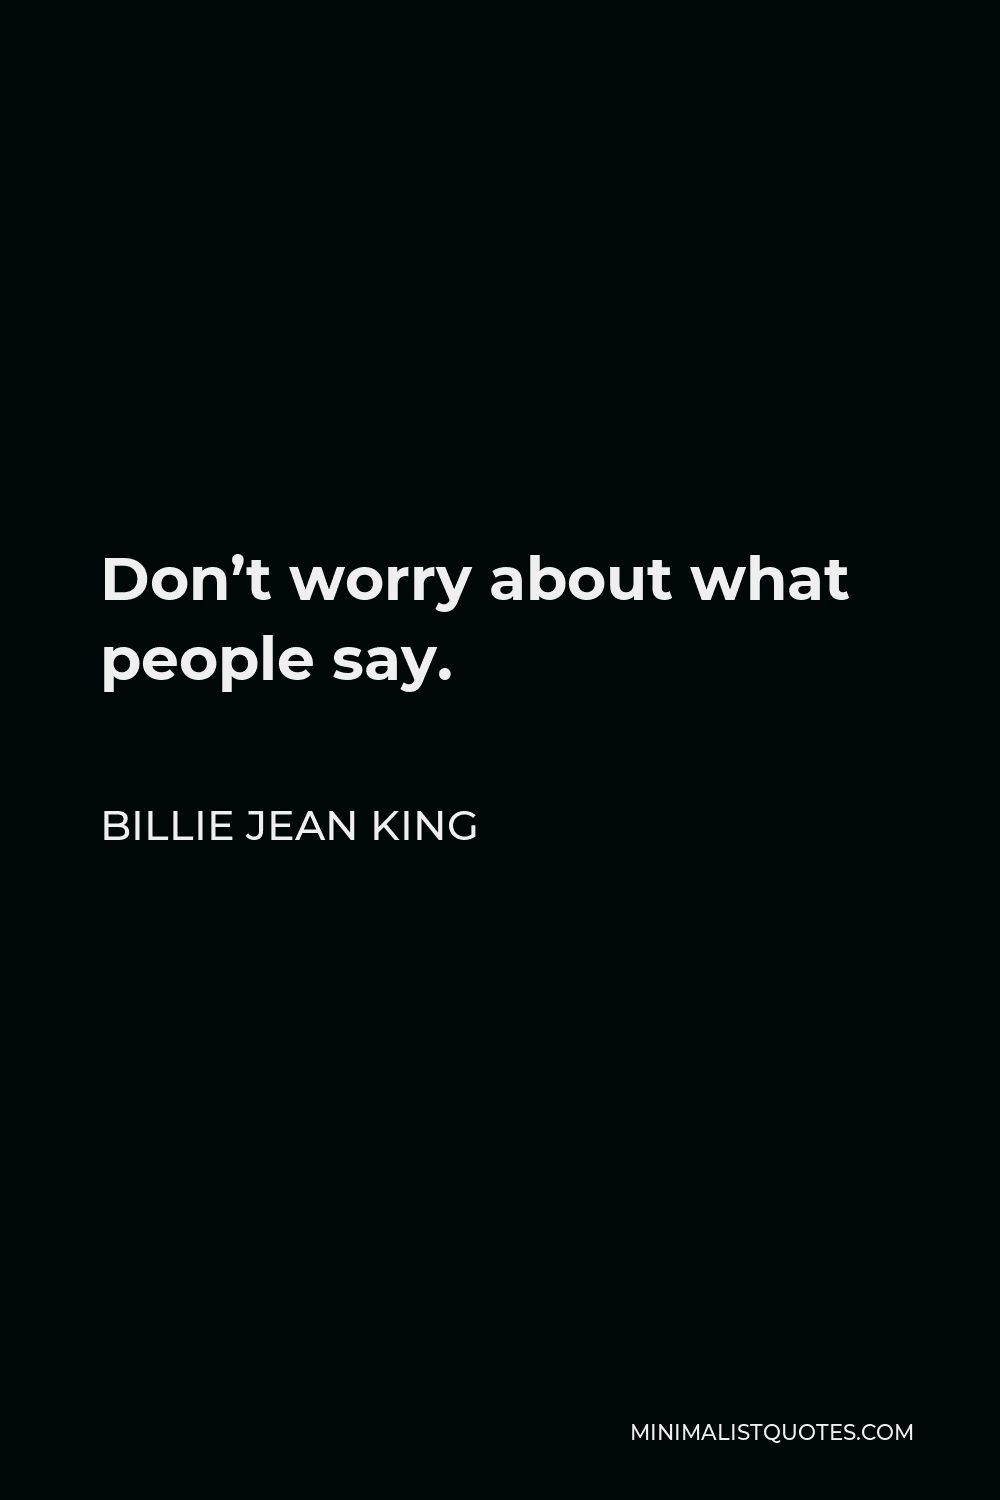 Billie Jean King Quote - Don’t worry about what people say.